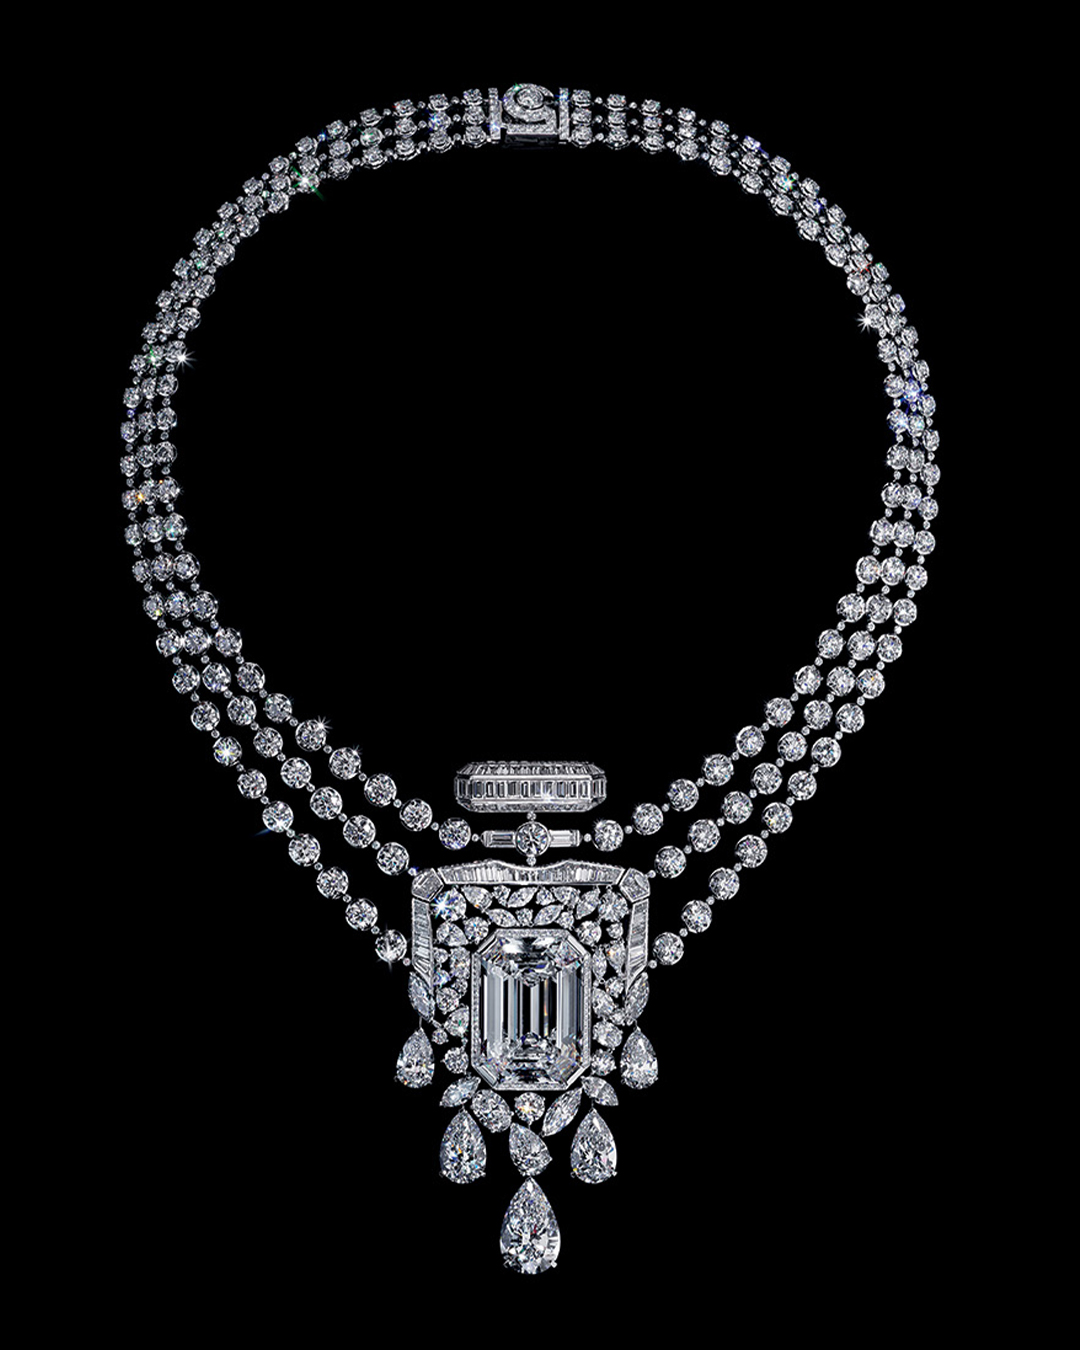 Chanel reveals new Tweed de Chanel high jewellery collection